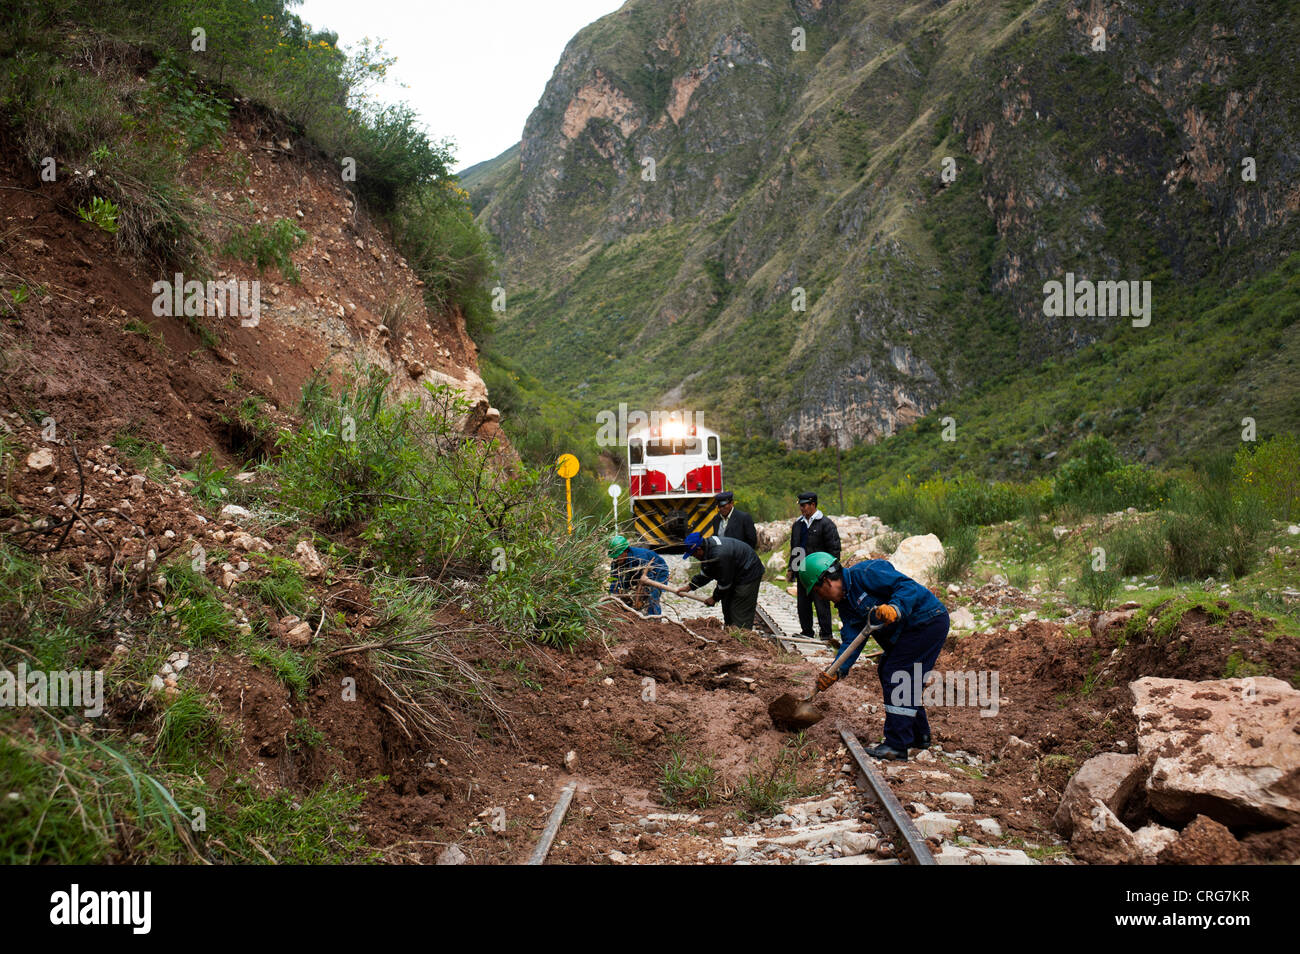 A trip in the Tren Macho, the train that connects the cities of Huancayo and Huancavelica in Peru Stock Photo